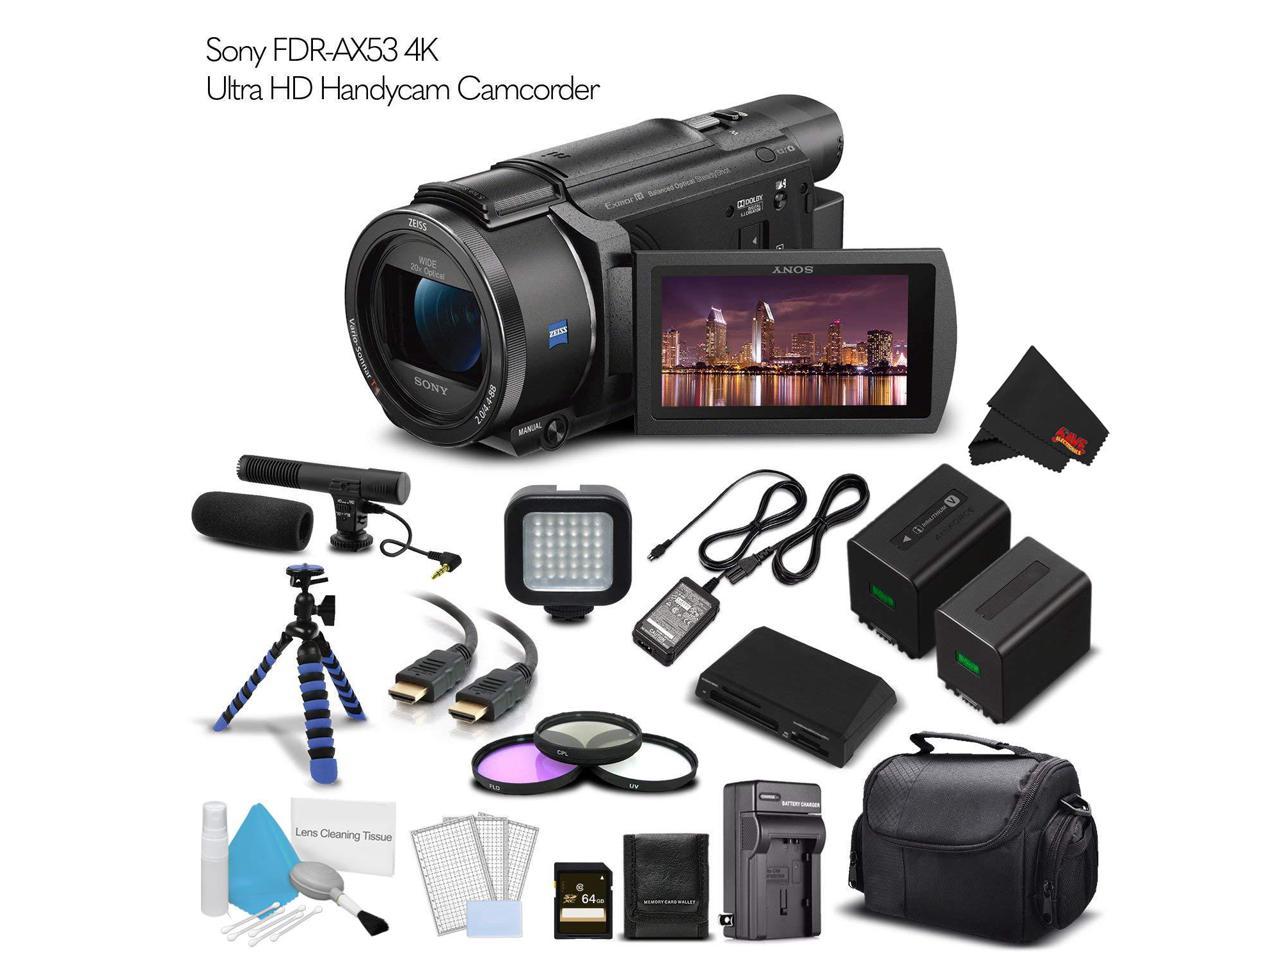 Sony FDR-AX53 4K Ultra HD Handycam Camcorder. (Intl Model) Extra Battery with Charger + 64GB Memory Card + Tripod + Light + Bag And More - Cinematographer Bundle